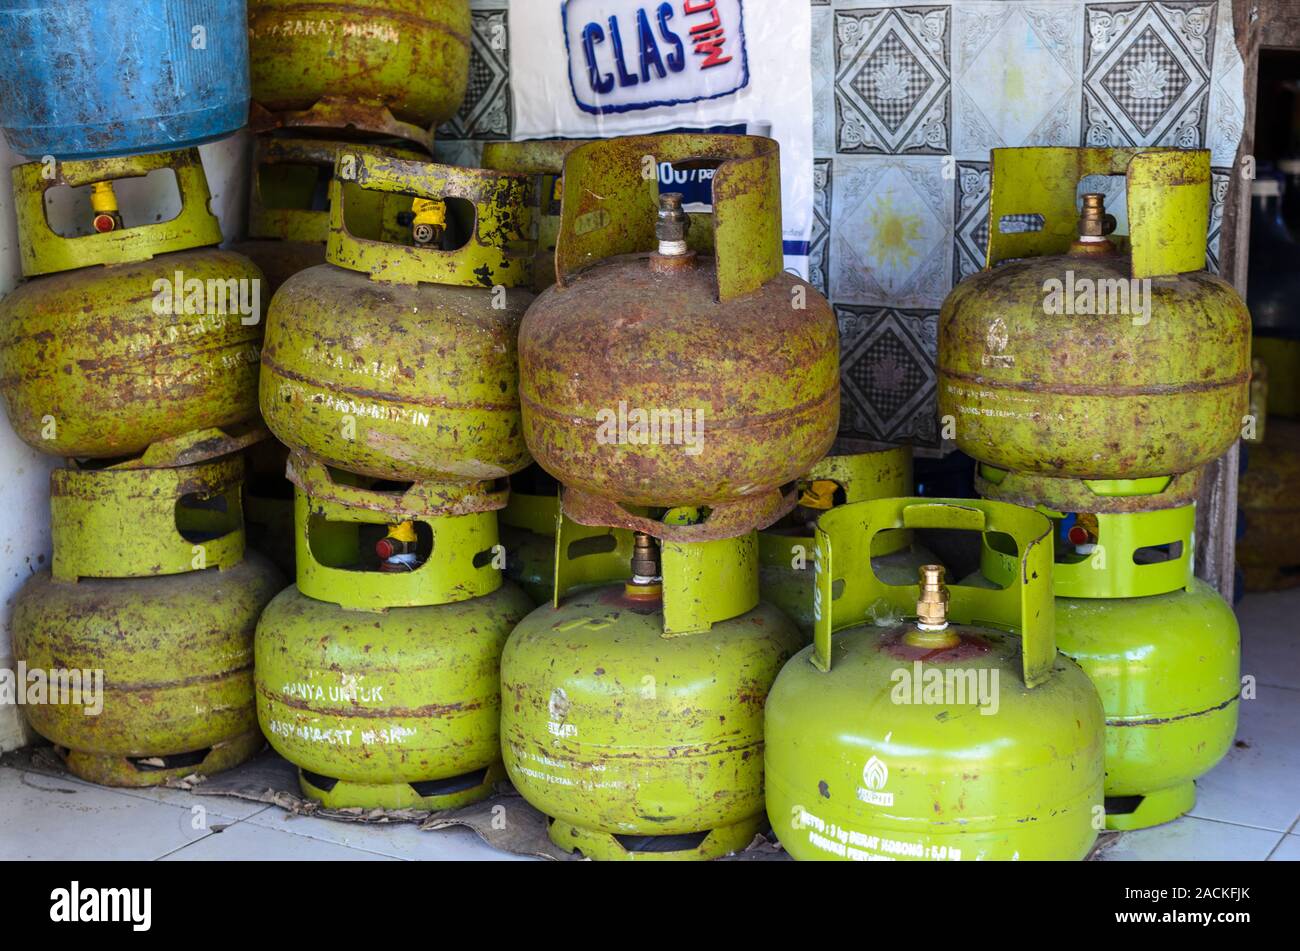 Old rusted gas cylinders for cooking are stacked on the street.  Bali, Indonesia, 2018-04-29 Stock Photo